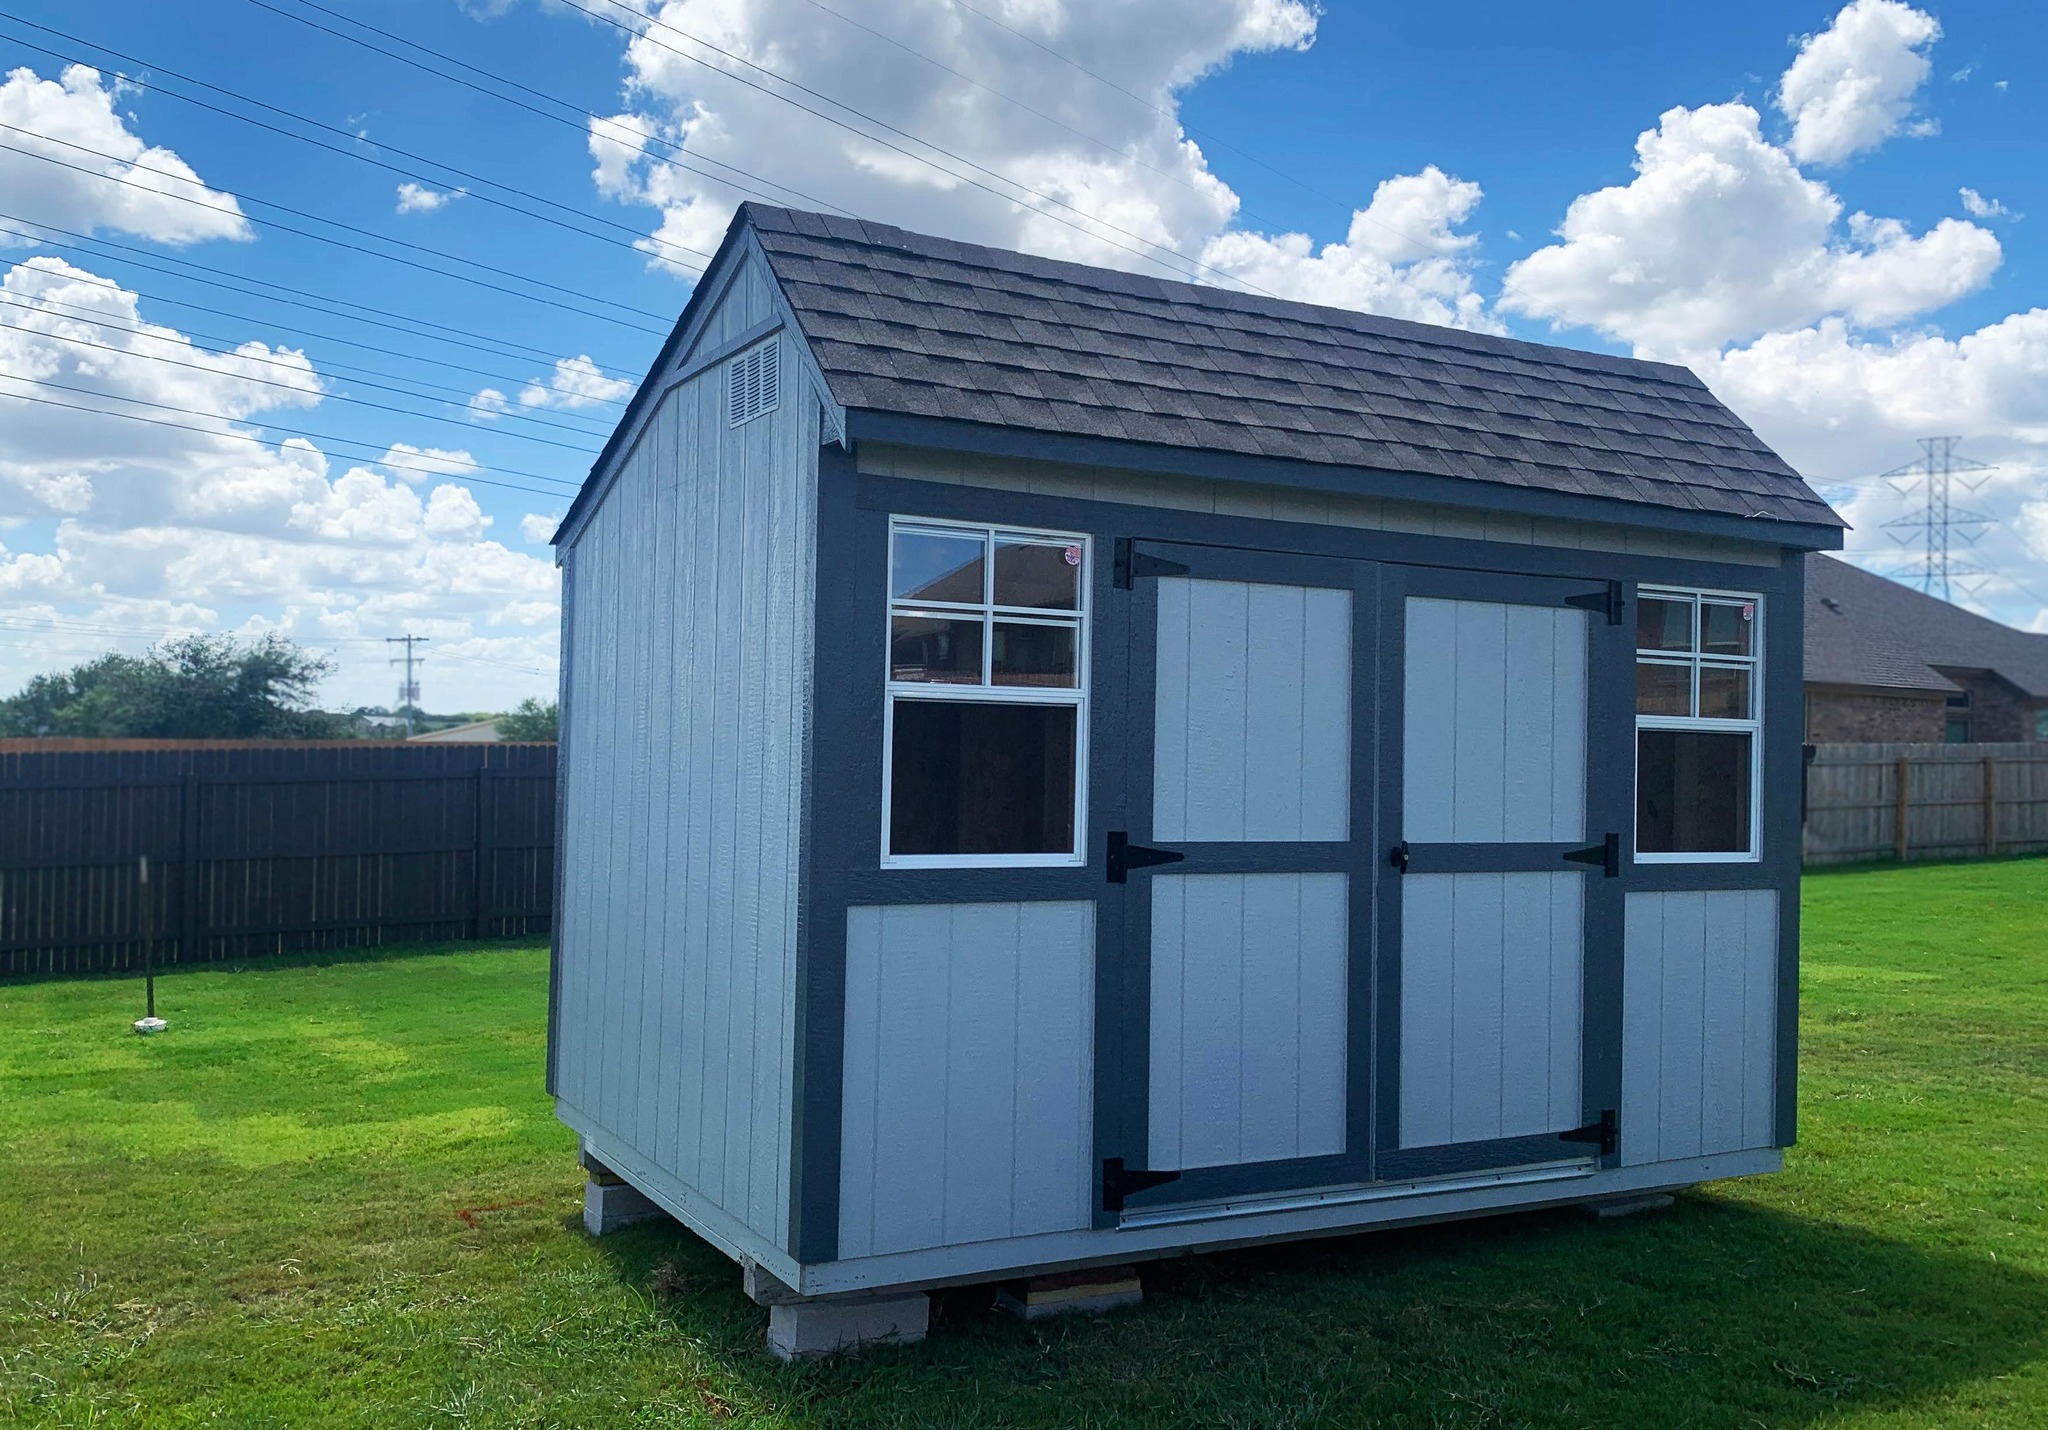 Texas Lelands Painted Garden Shed, Home Office, Home Gym, She Shed, Man Cave